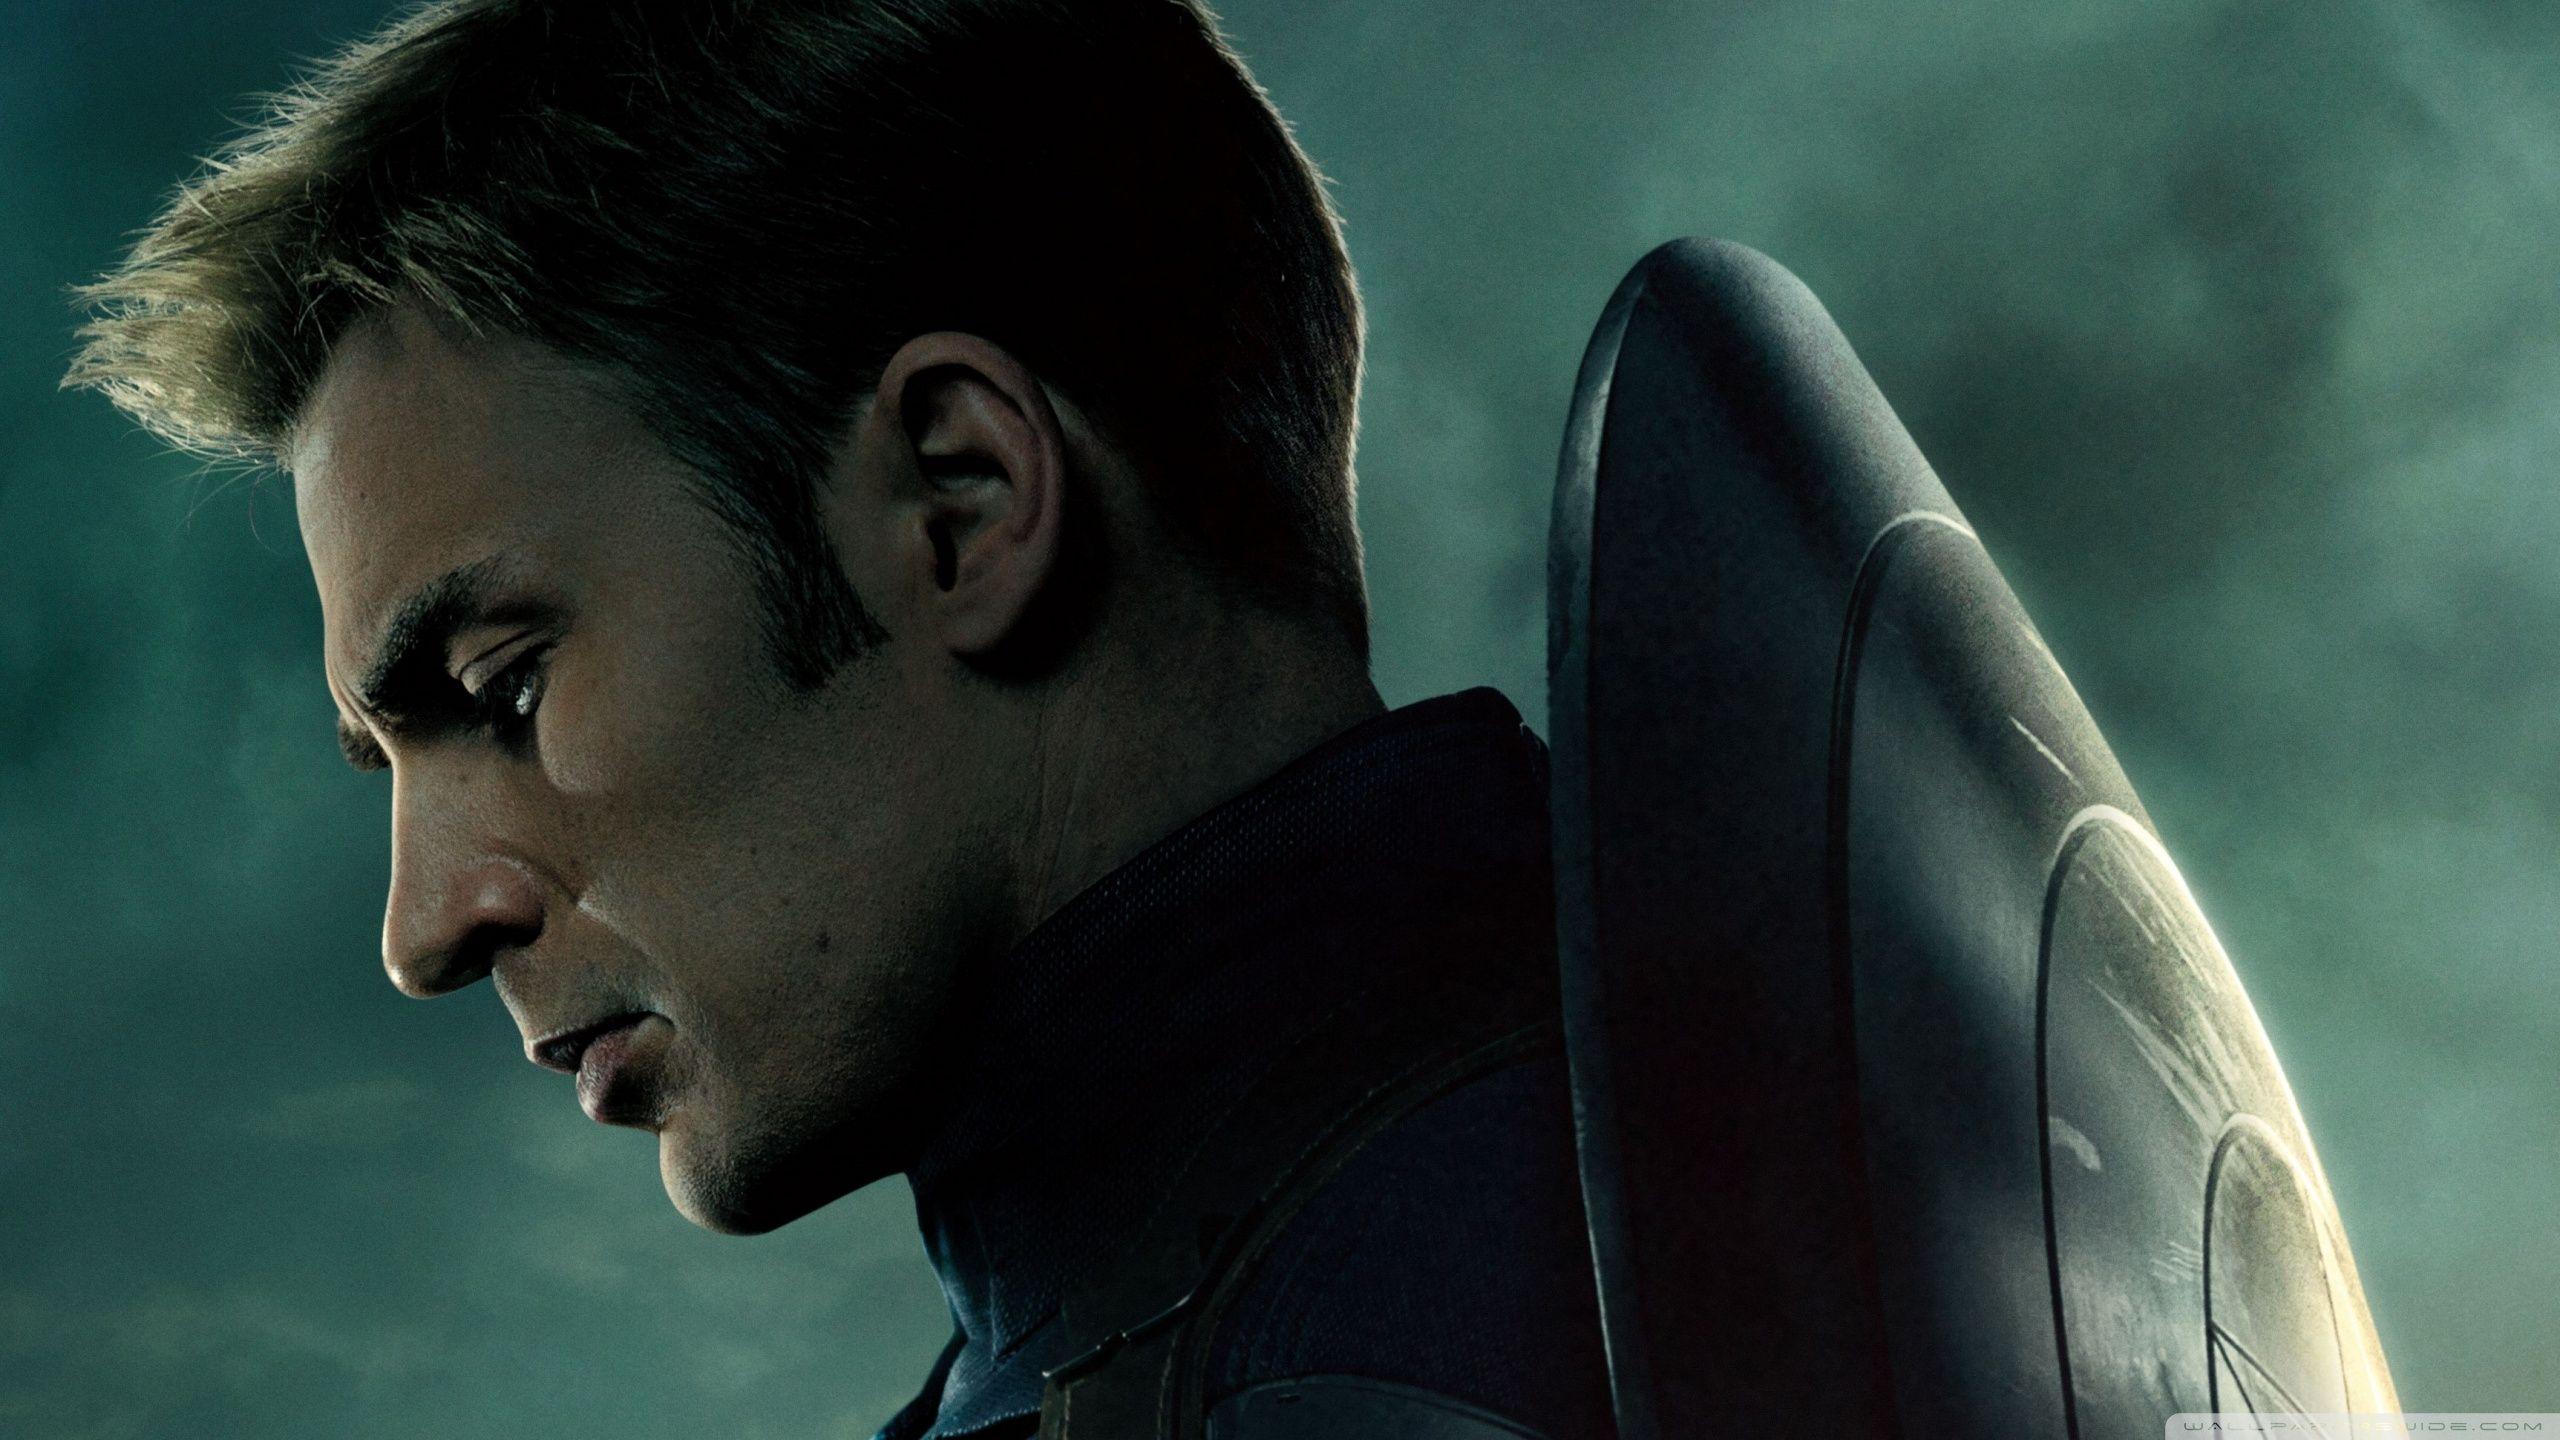 CAPTAIN AMERICA THE WINTER SOLDIER Wallpapers and Desktop